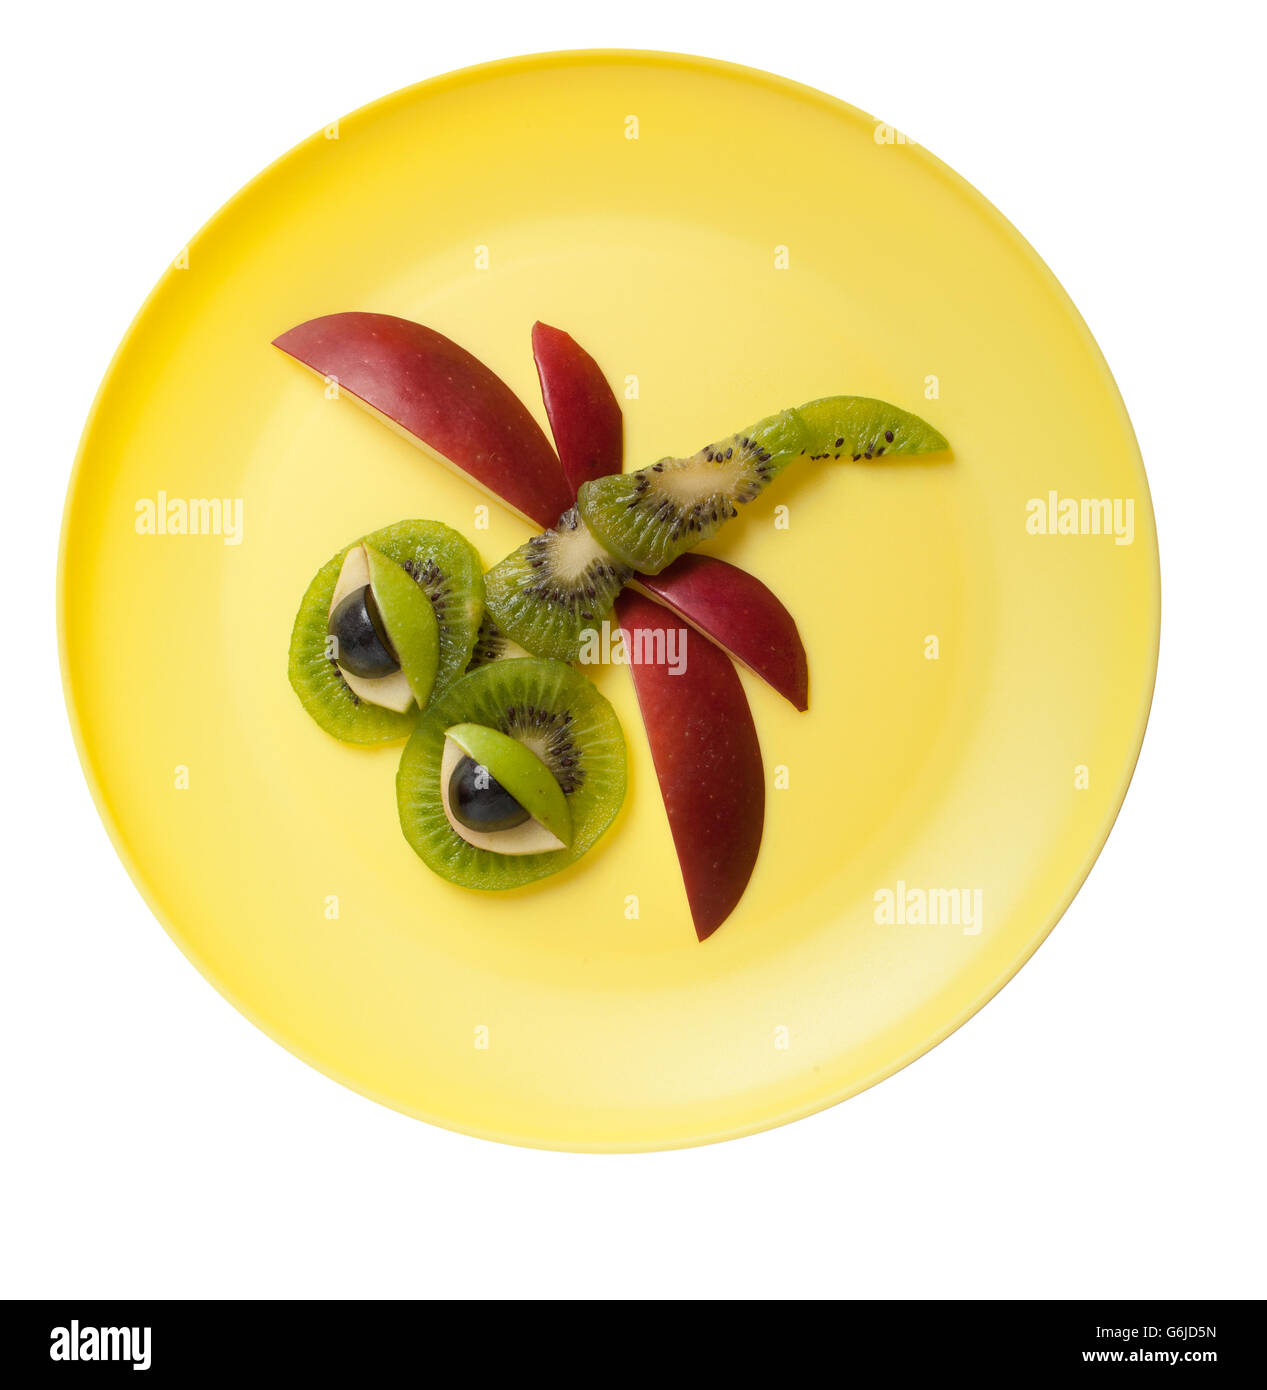 Amusing dragonfly made of fruits on yellow plate Stock Photo